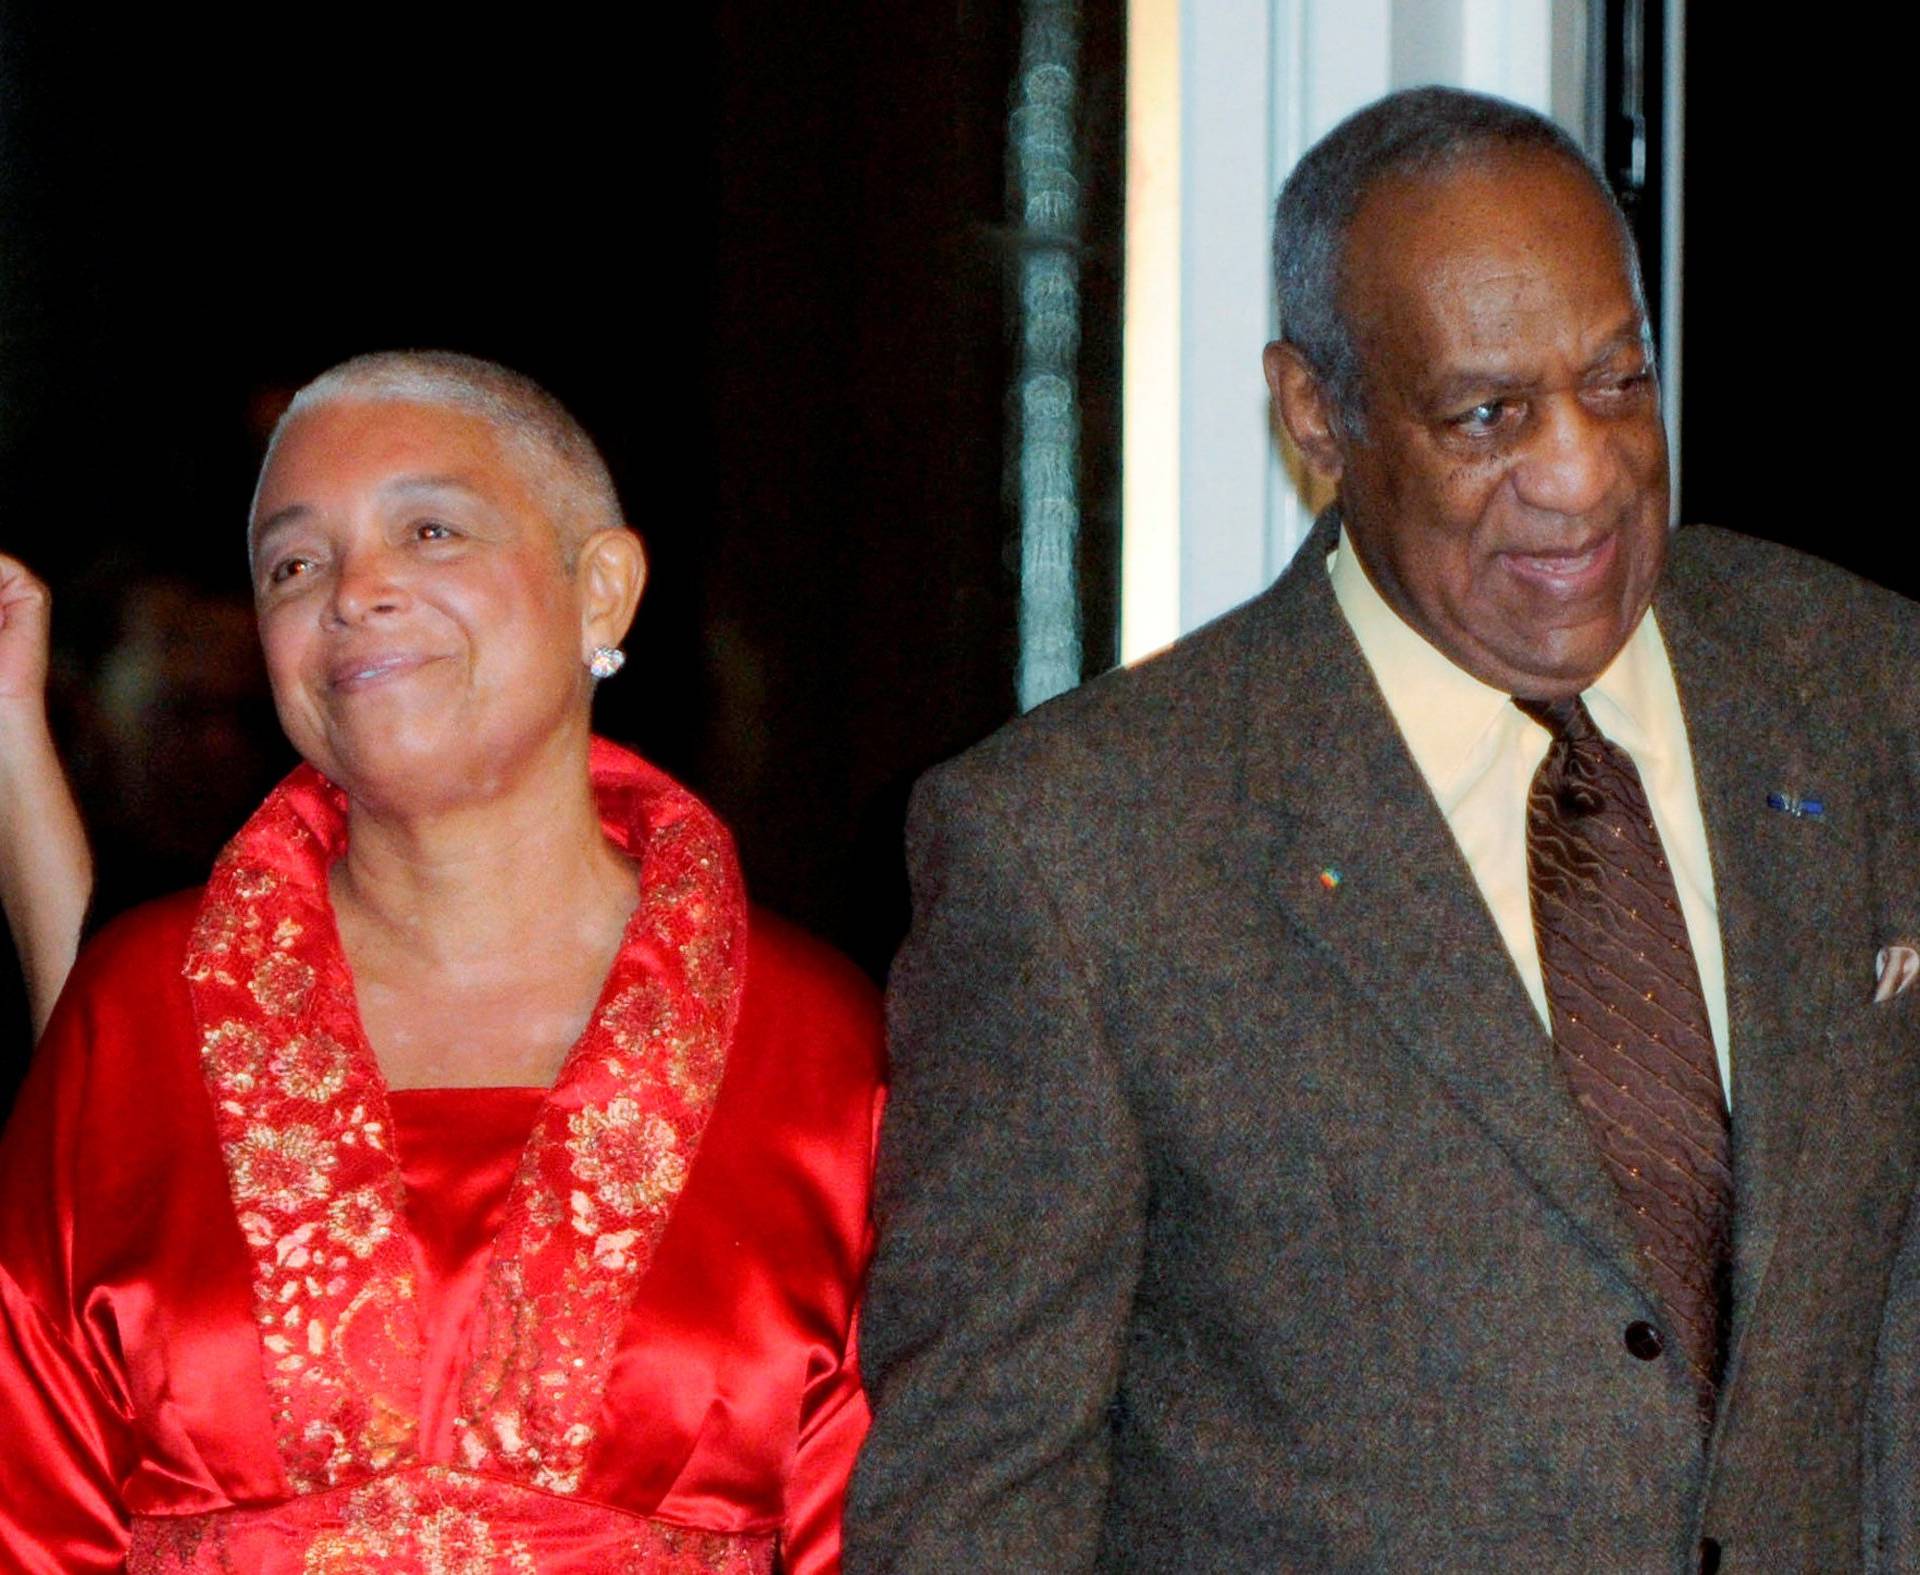 FILE PHOTO: Comedian Bill Cosby and his wife Camille arrive at the Kennedy Center For the Performing Arts in Washington